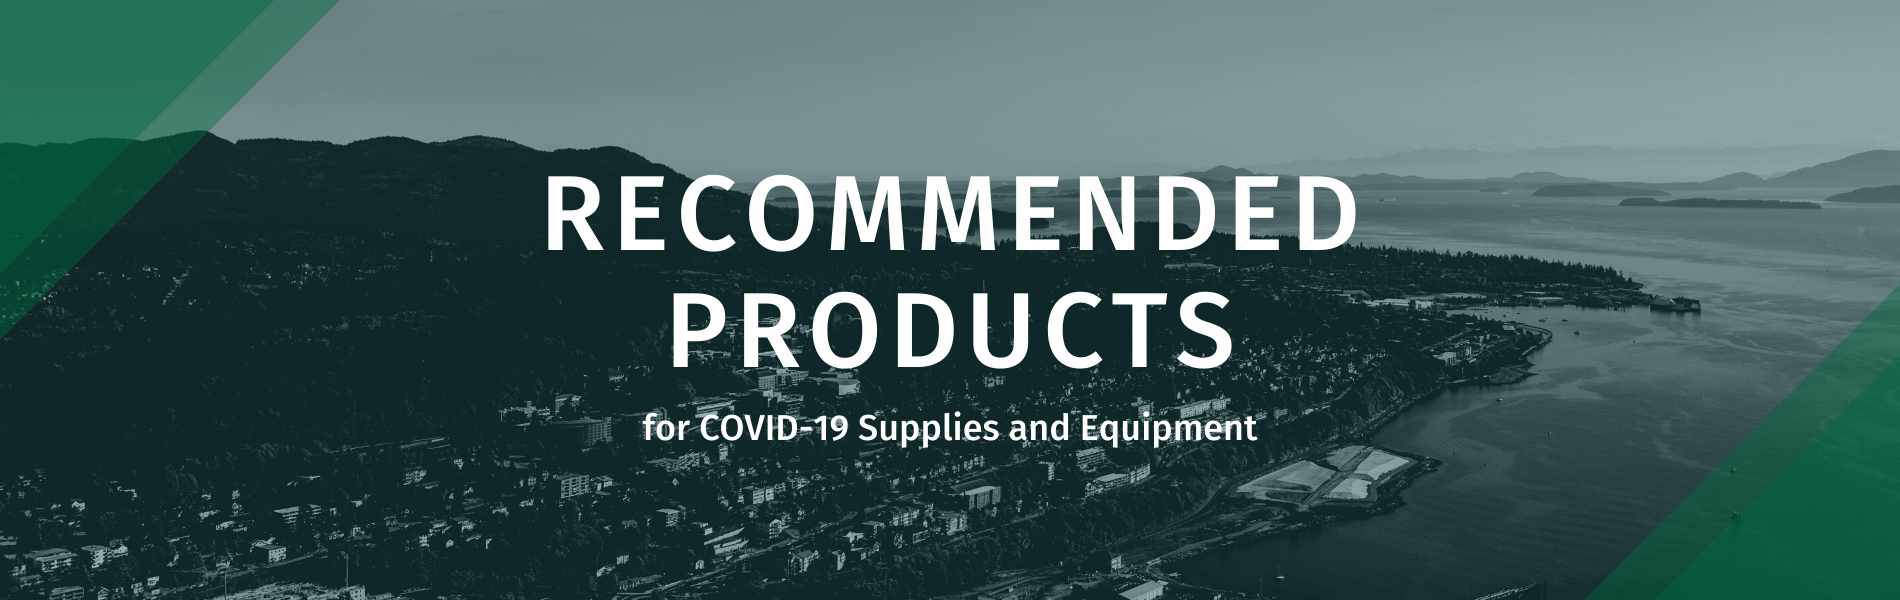 Recommended Products - Supplies and Equipment